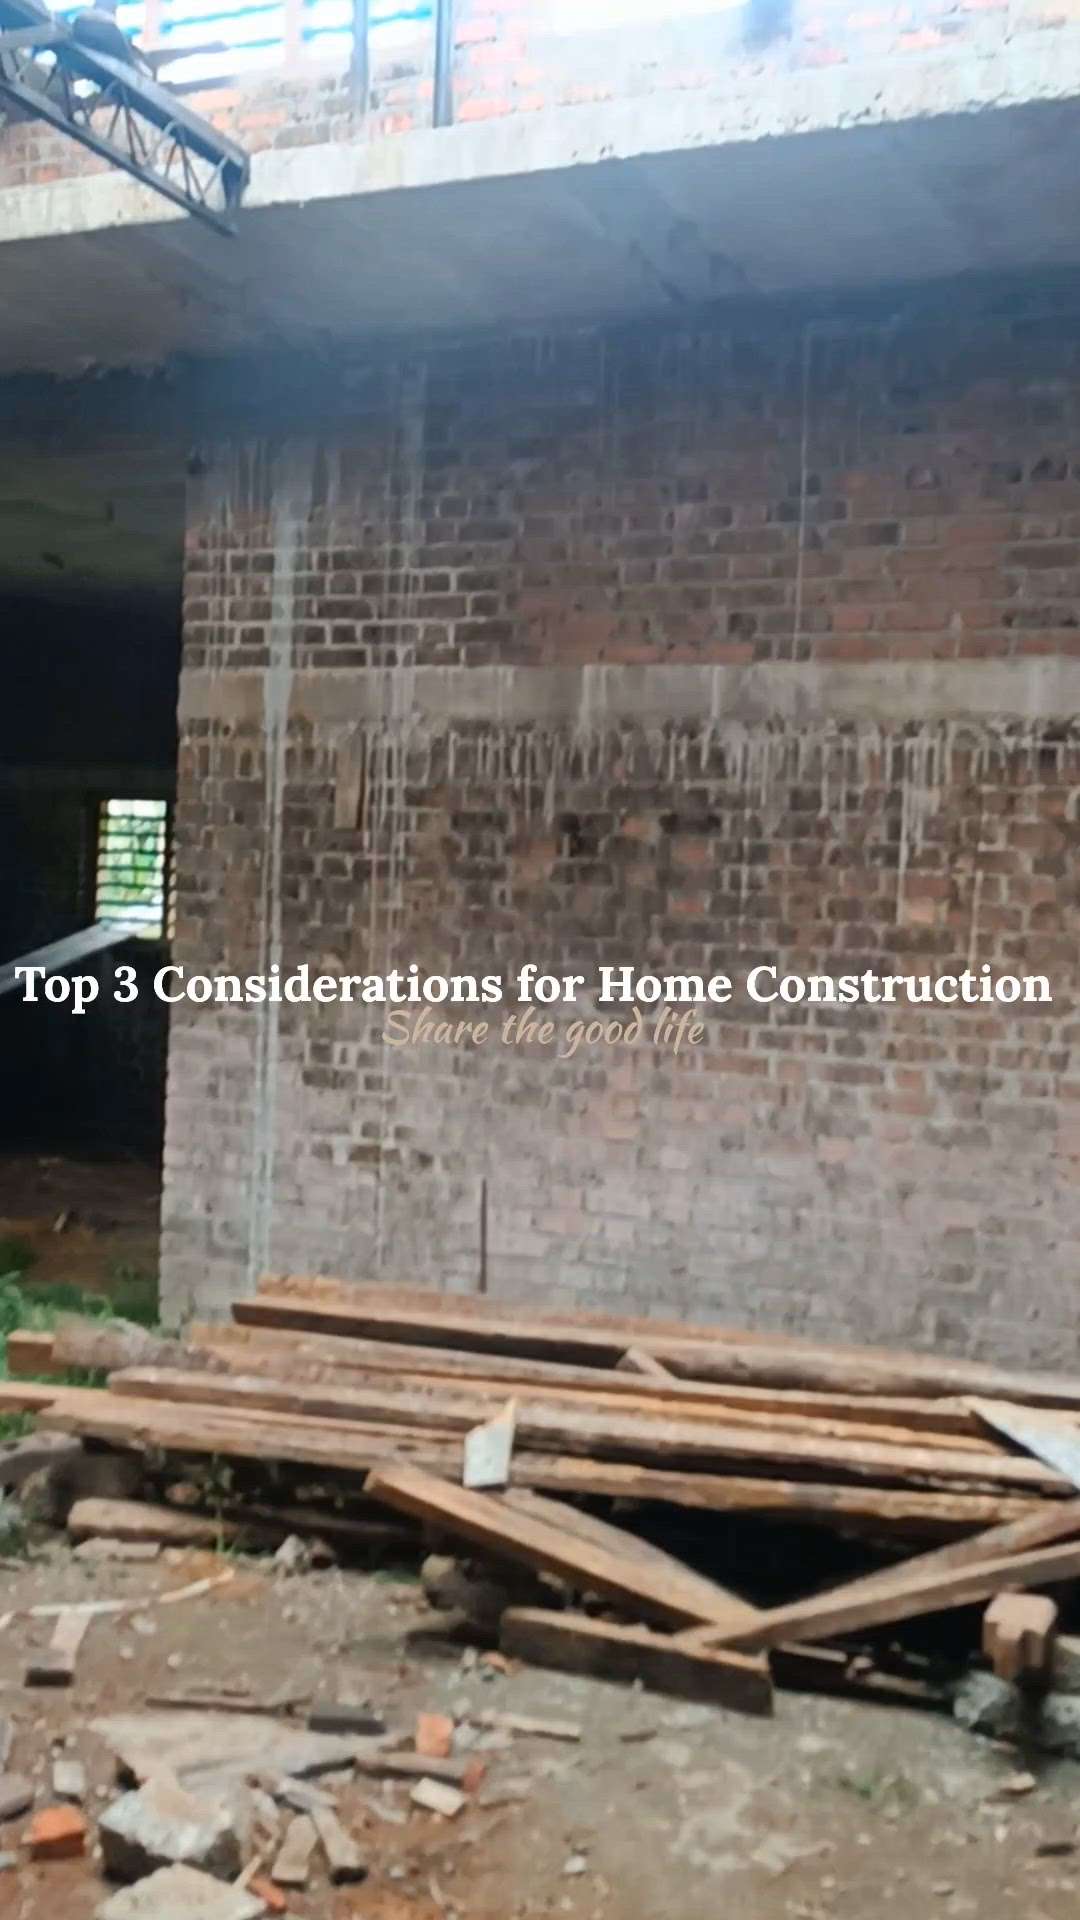 Top 3 Considerations for Home Construction
#creatorsofkolo #create #ElevationHome #HouseConstruction #tips #cheapest #3dhouse #3dmodel